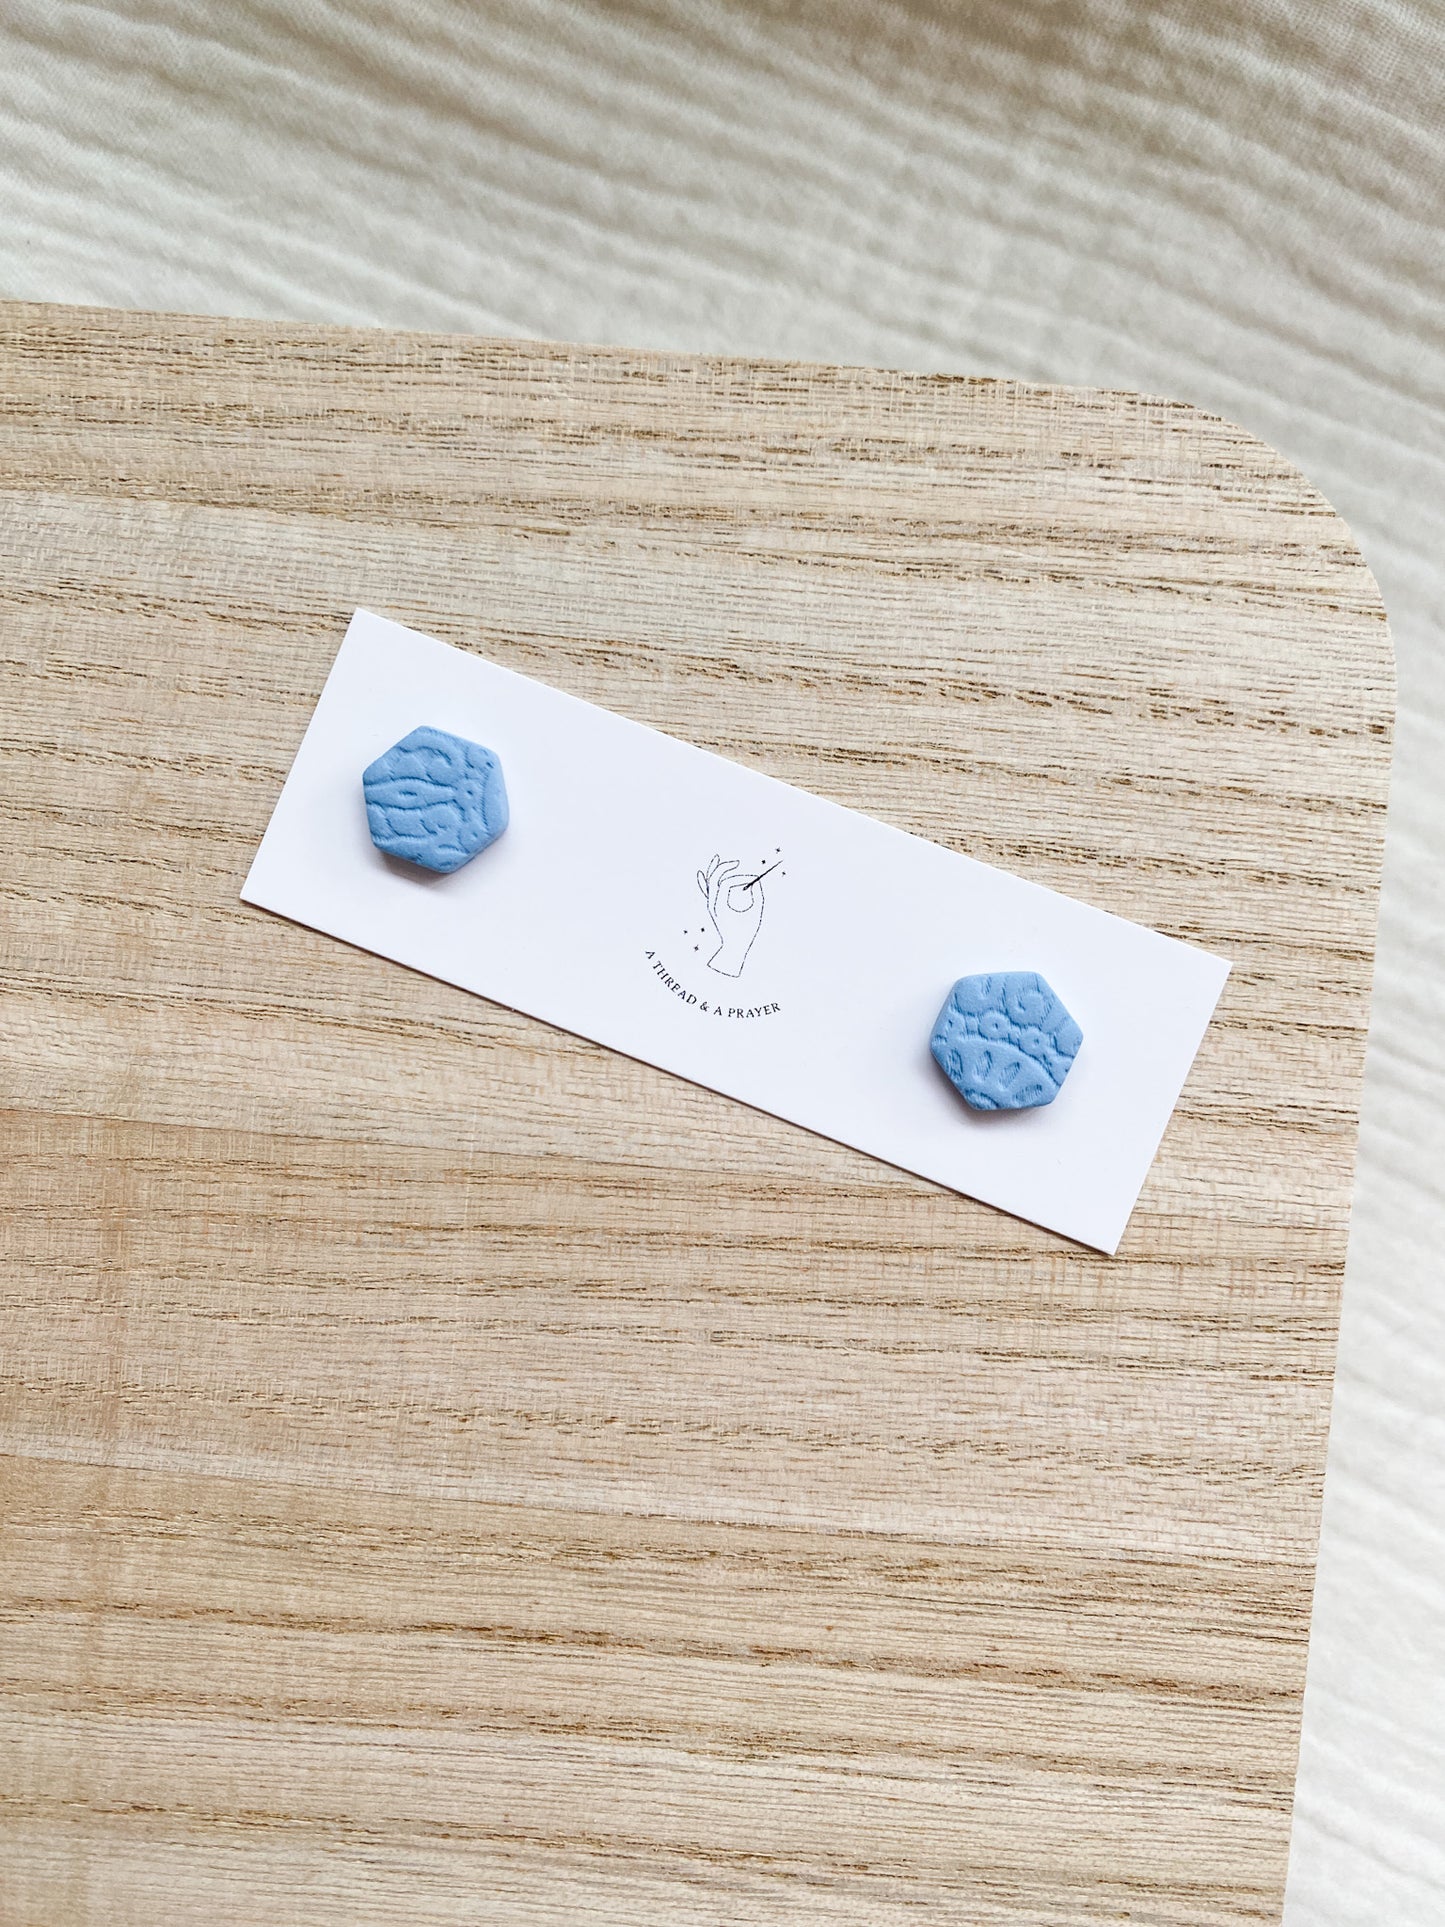 Pick Your Own Studs | Single Studs | Clay Earrings  | Spring Stud Pack Earrings | Polymer Clay Studs | Lightweight Earrings